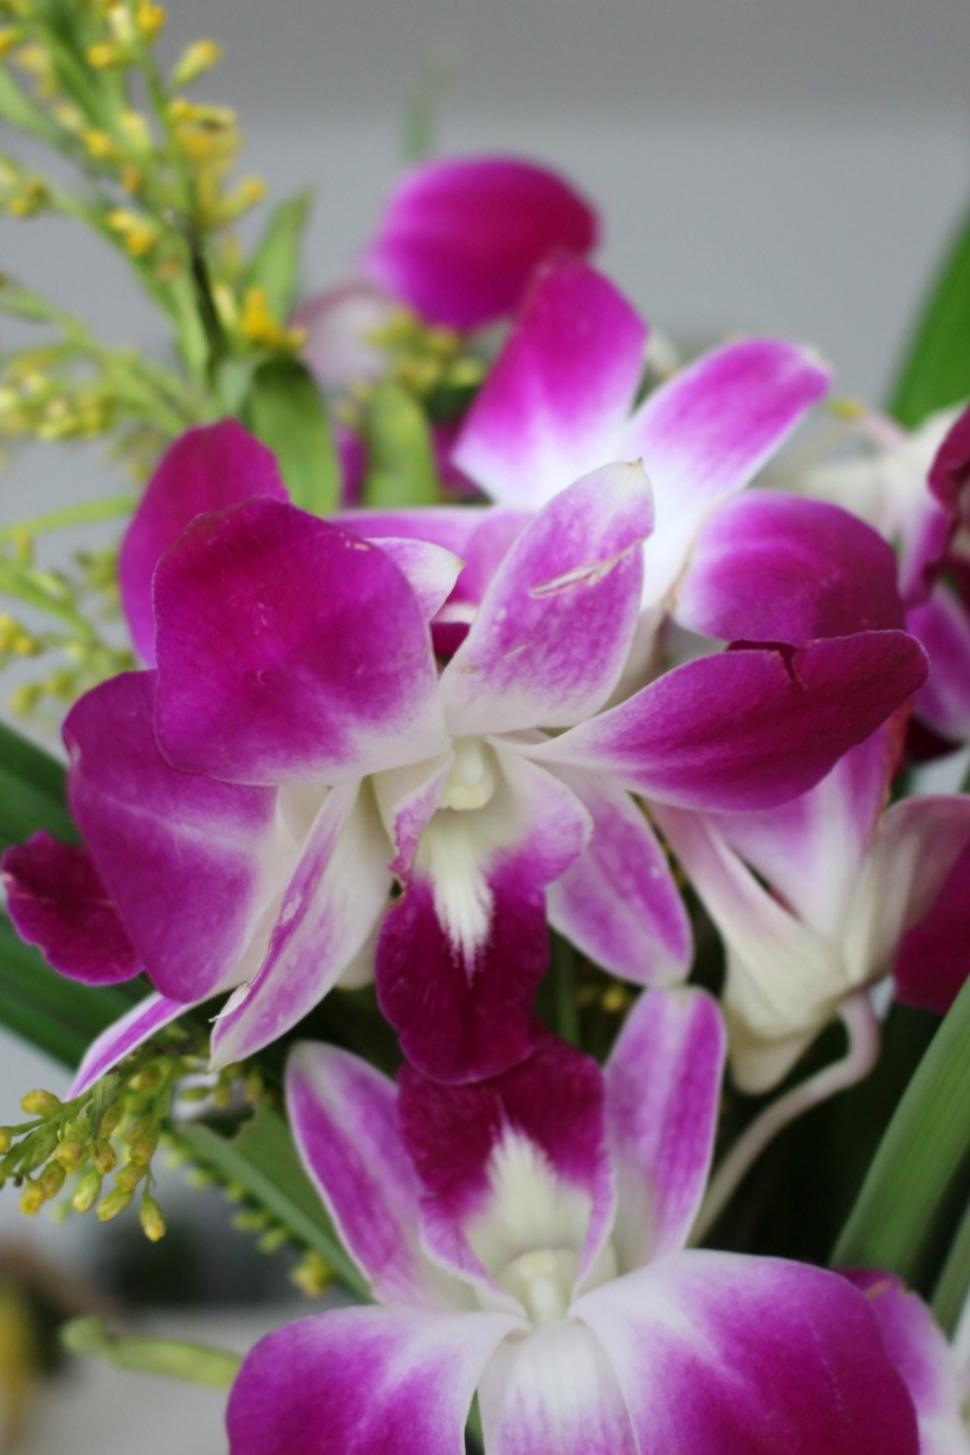 Free Image of Display of pink orchid flowers in bloom  